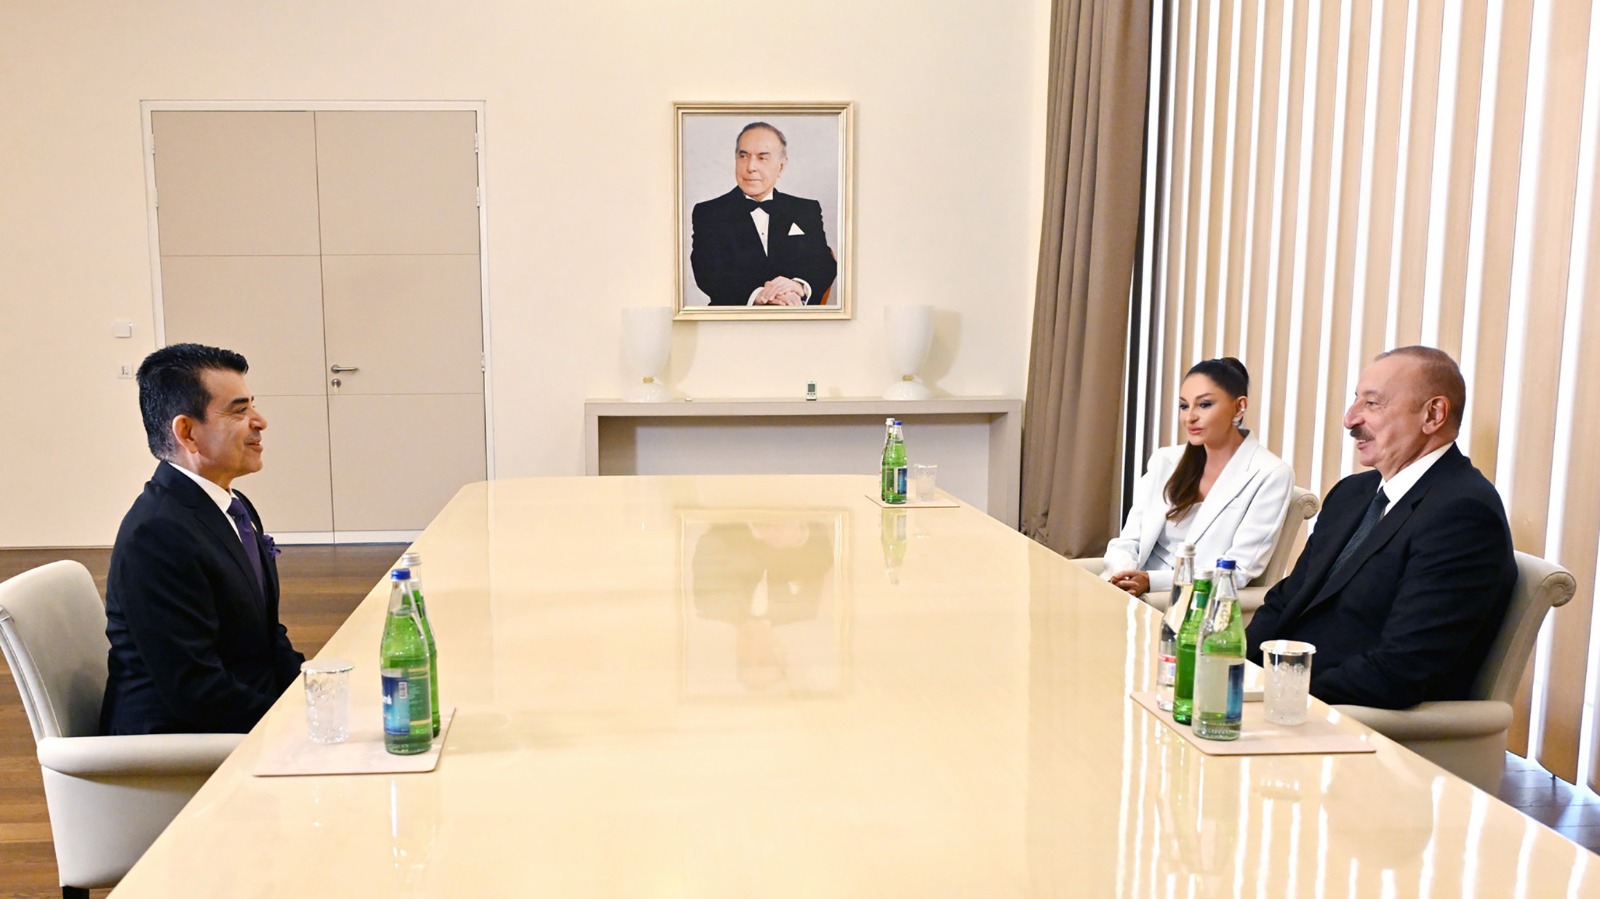 The President of the Republic of Azerbaijan Receives the Director-General of ICESCO and Announces His Sponsorship for the celebration of Shusha as the Capital of Islamic Culture 2024